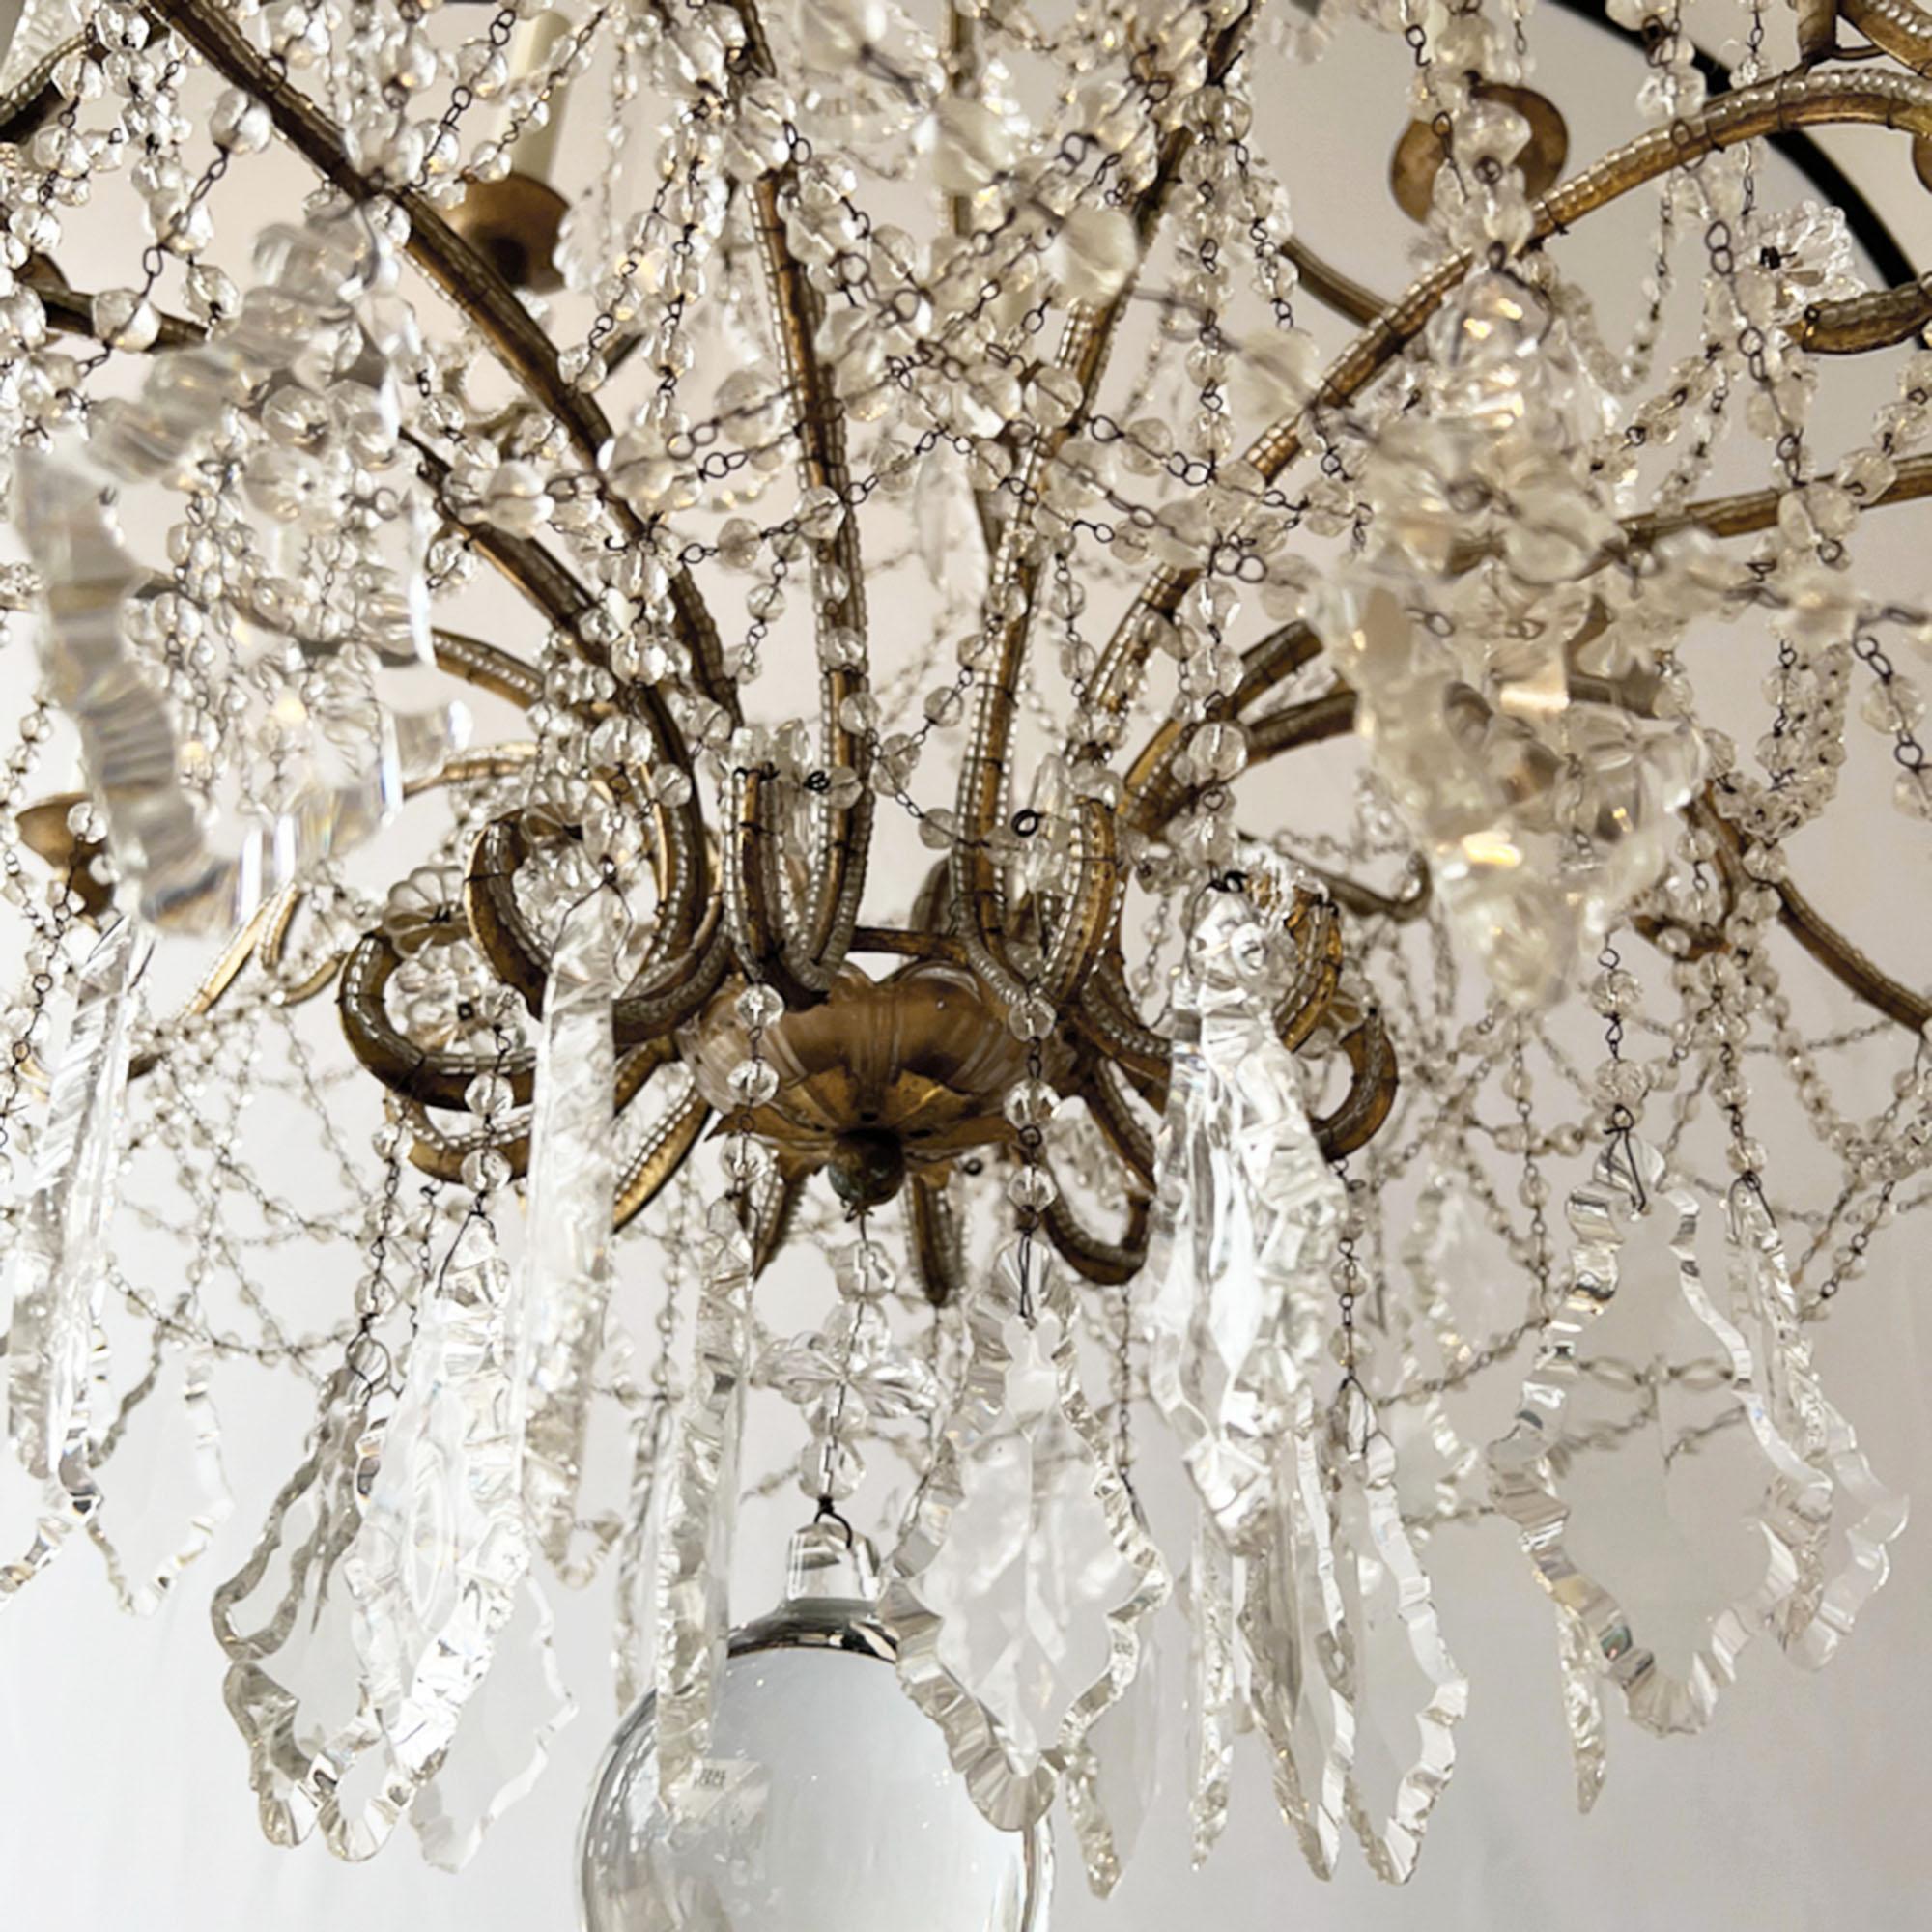 A stunning beaded chandelier, made in Italy in the 1950s.

Highly decorative and beautifully made with a gilt metal frame. 

Grand scale and gorgeous!.